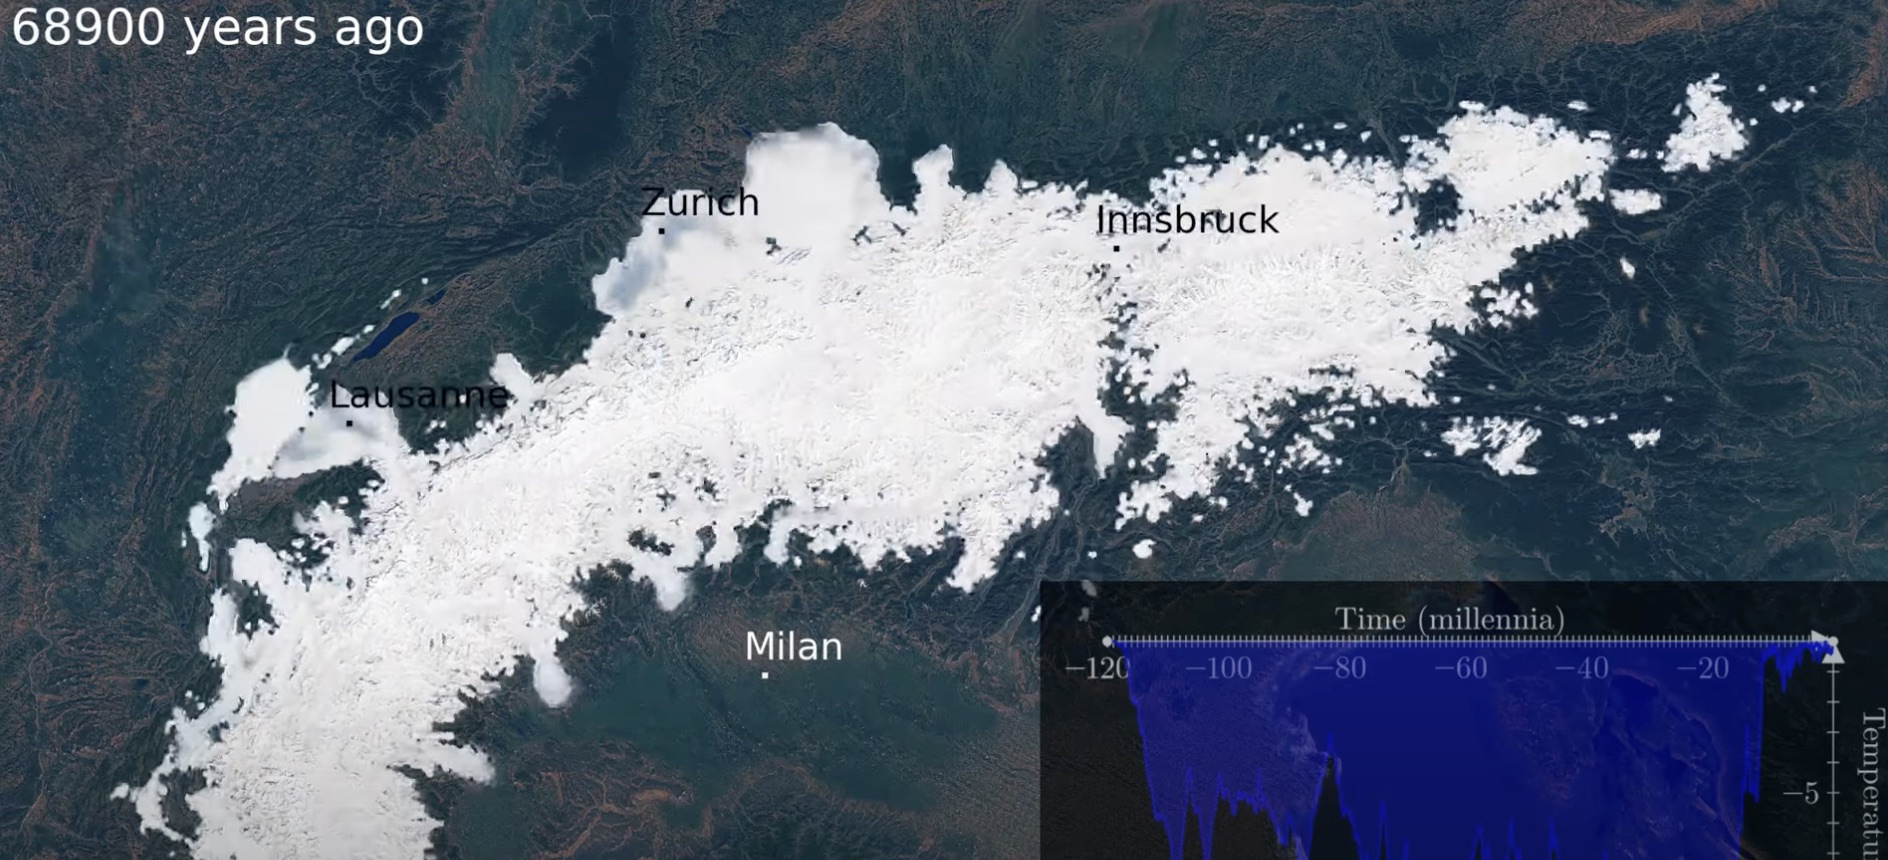 A simulation to visualize the evolution of Alpine ice cover over the last 120,000 years